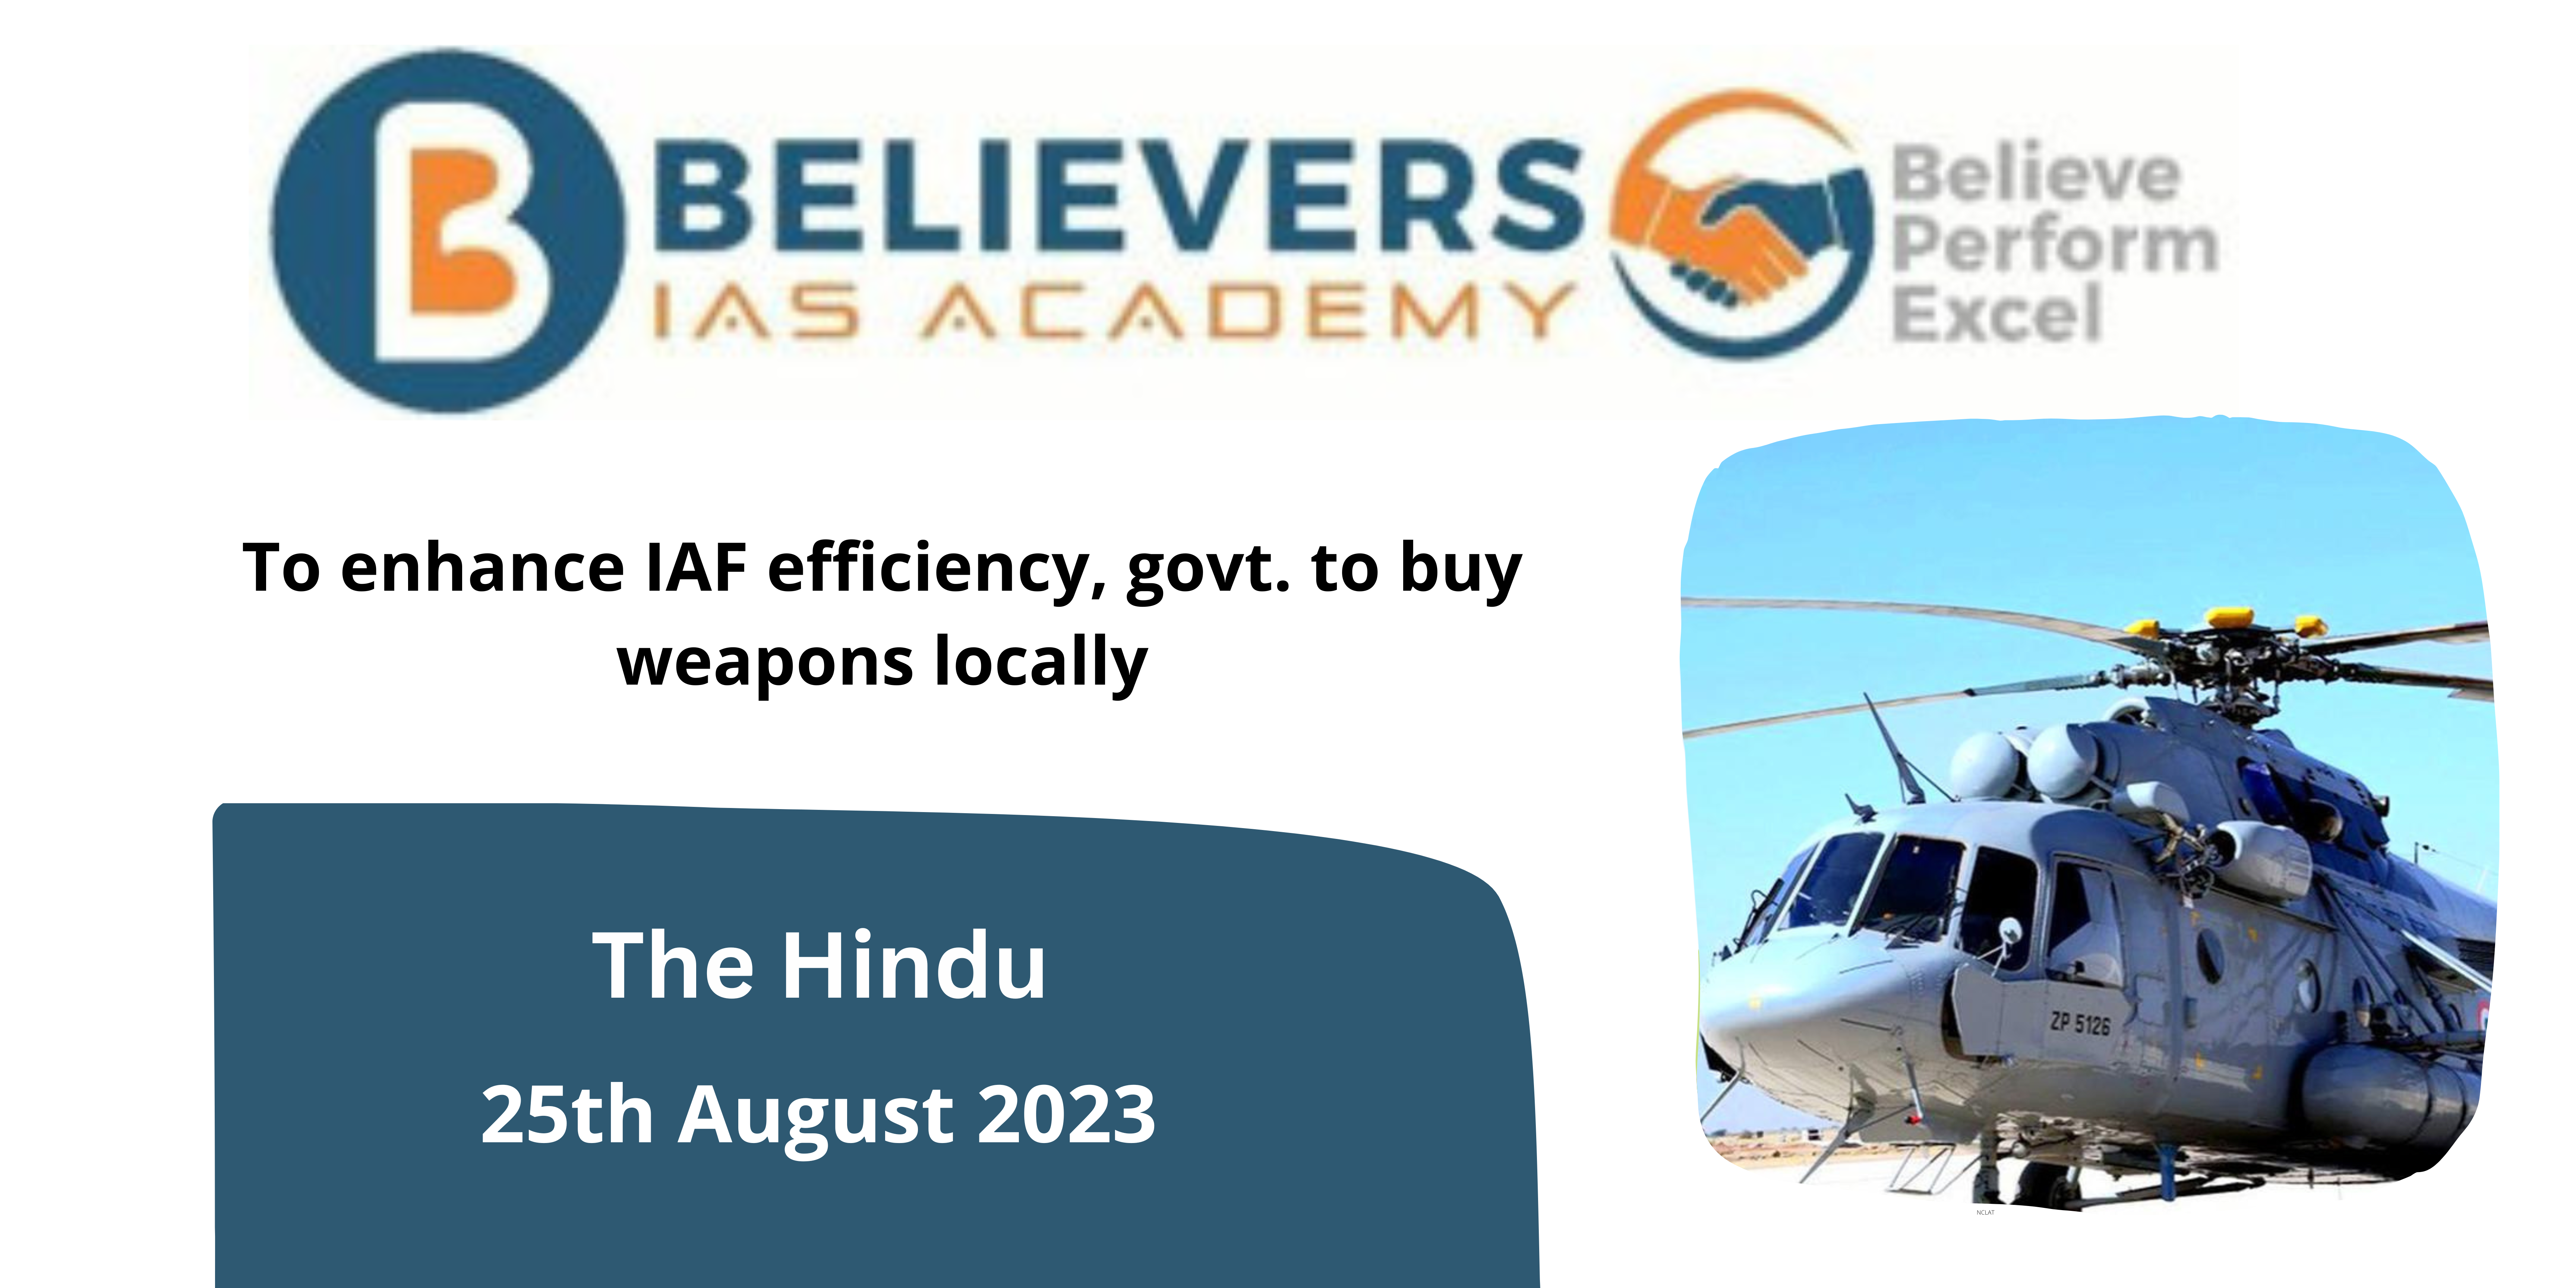 To enhance IAF efficiency, govt. to buy weapons locally